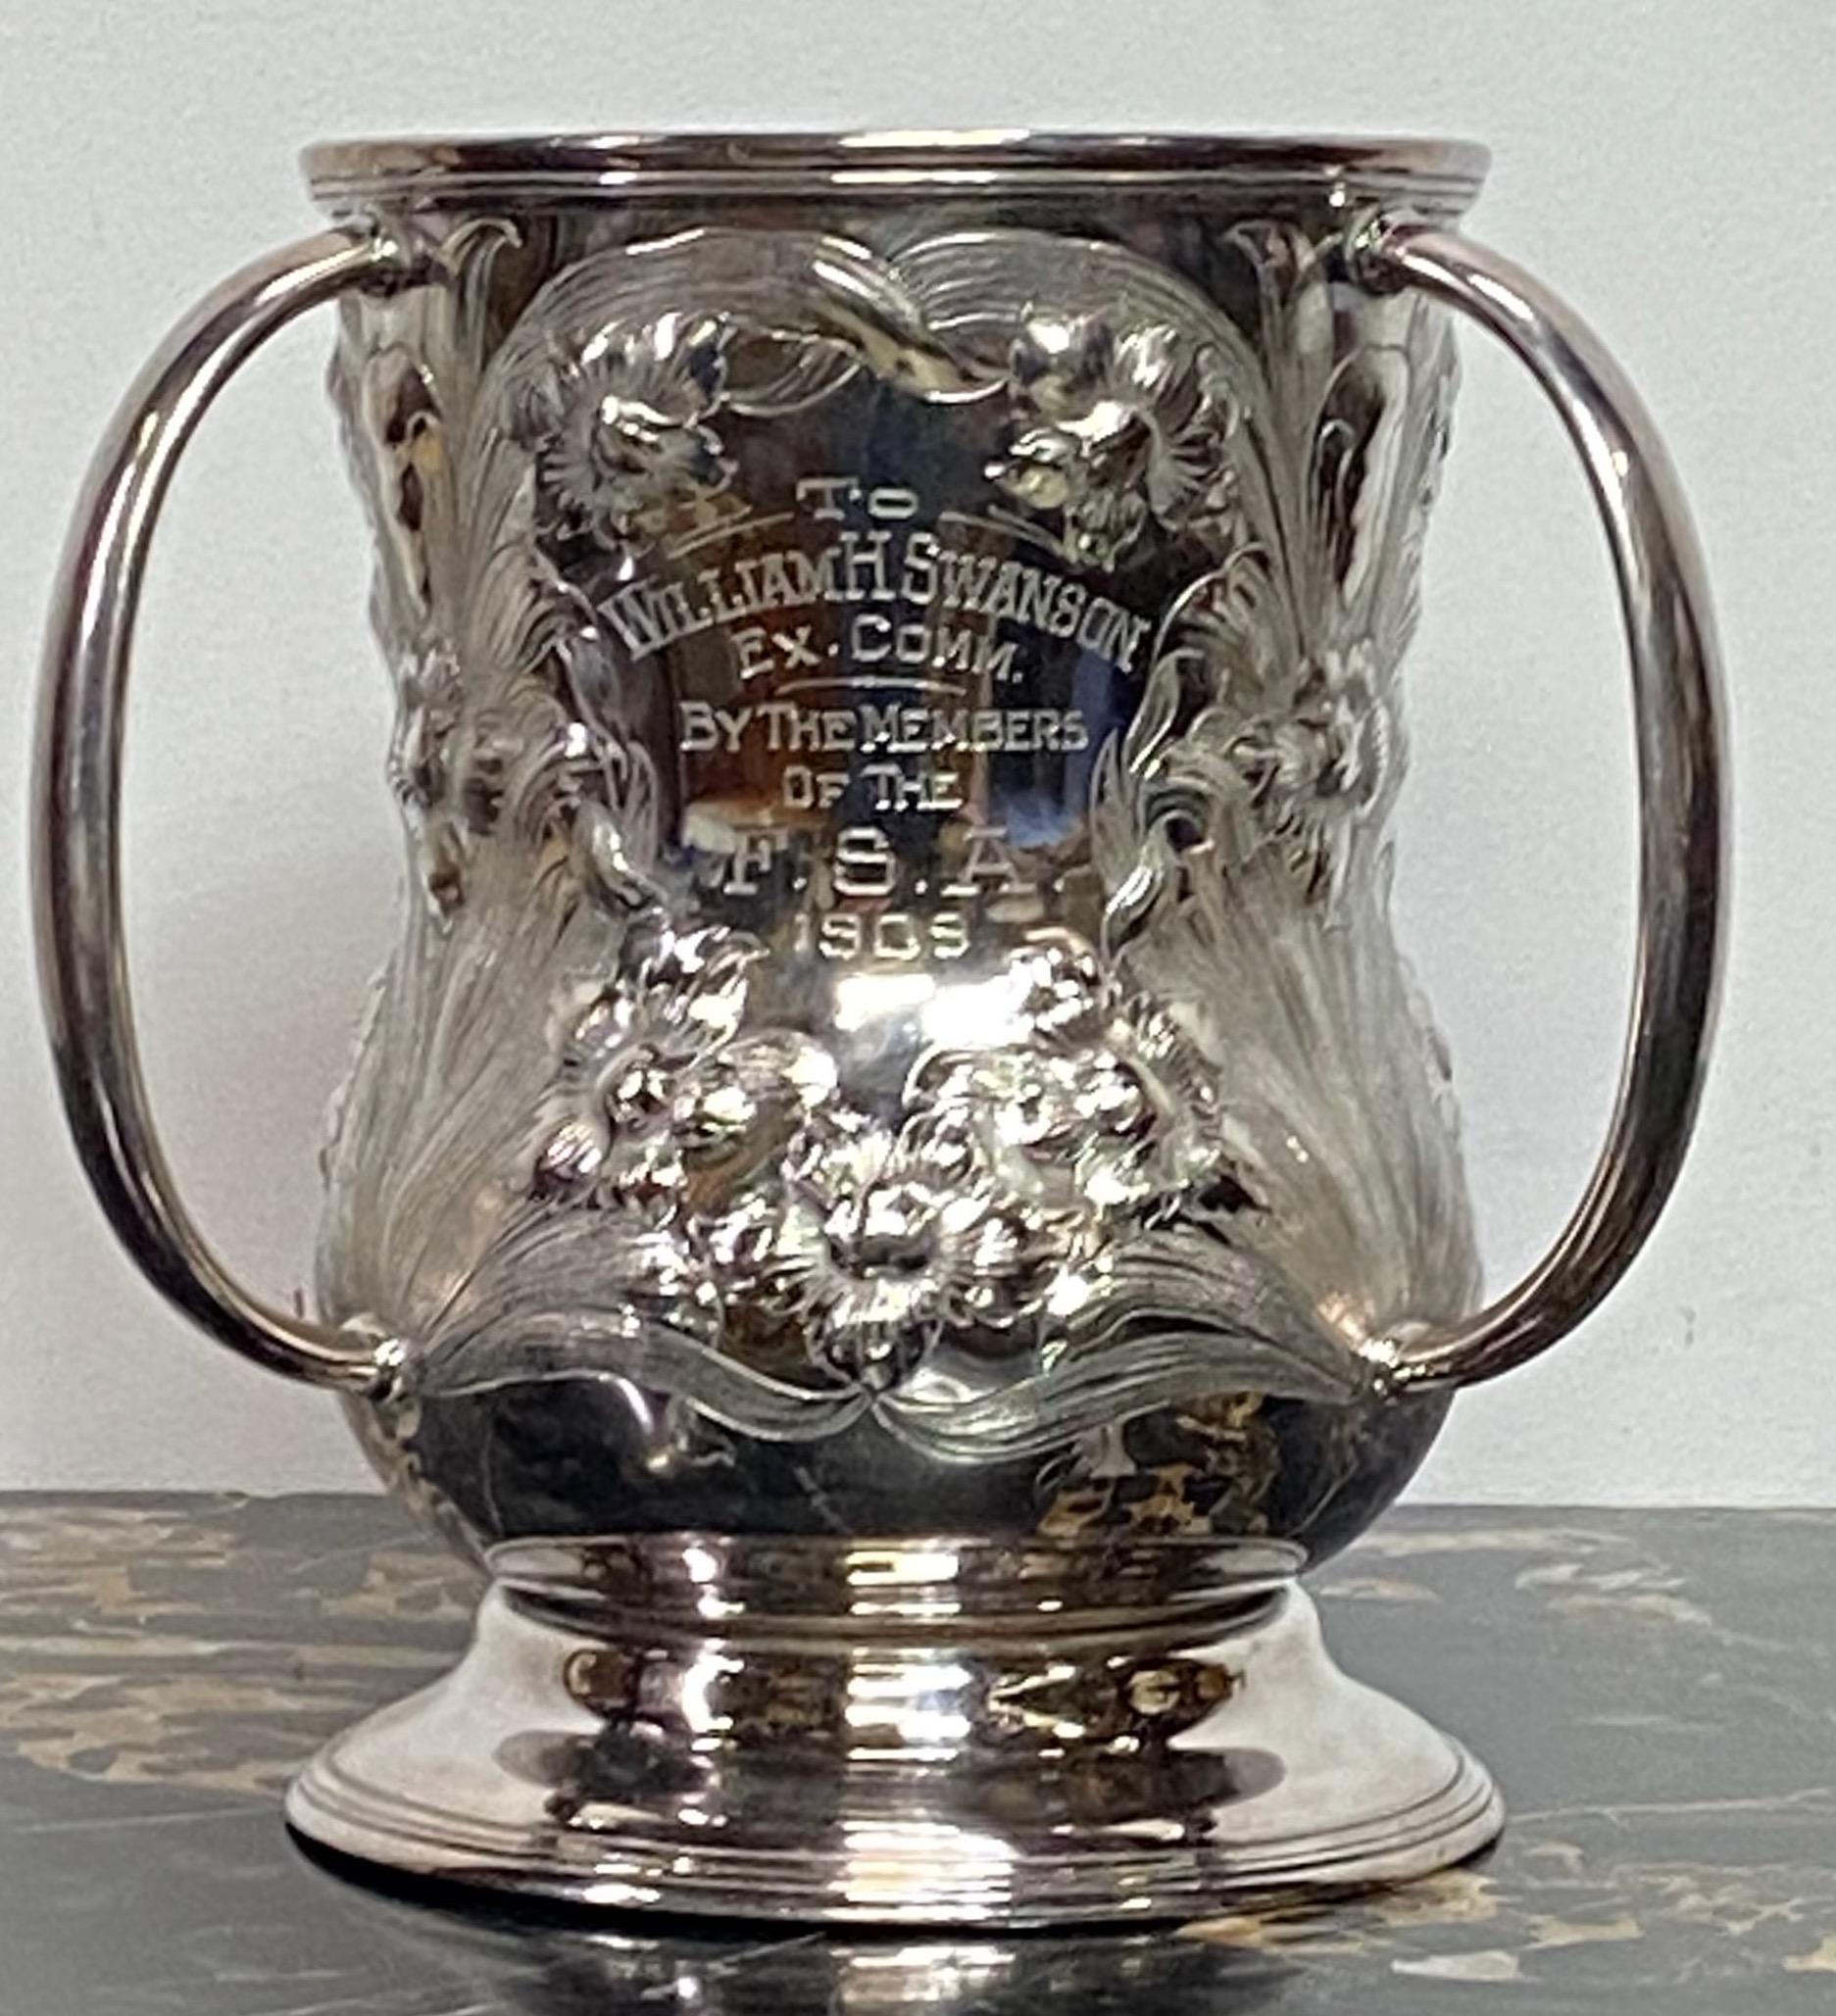 Art Nouveau style commemorative three handled loving cup trophy with raised floral decoration. This would also make an interesting wine or champagne cooler or as always a perfect vase.
Reads: To William H Swanson, Ex. Comm., By the Members of the